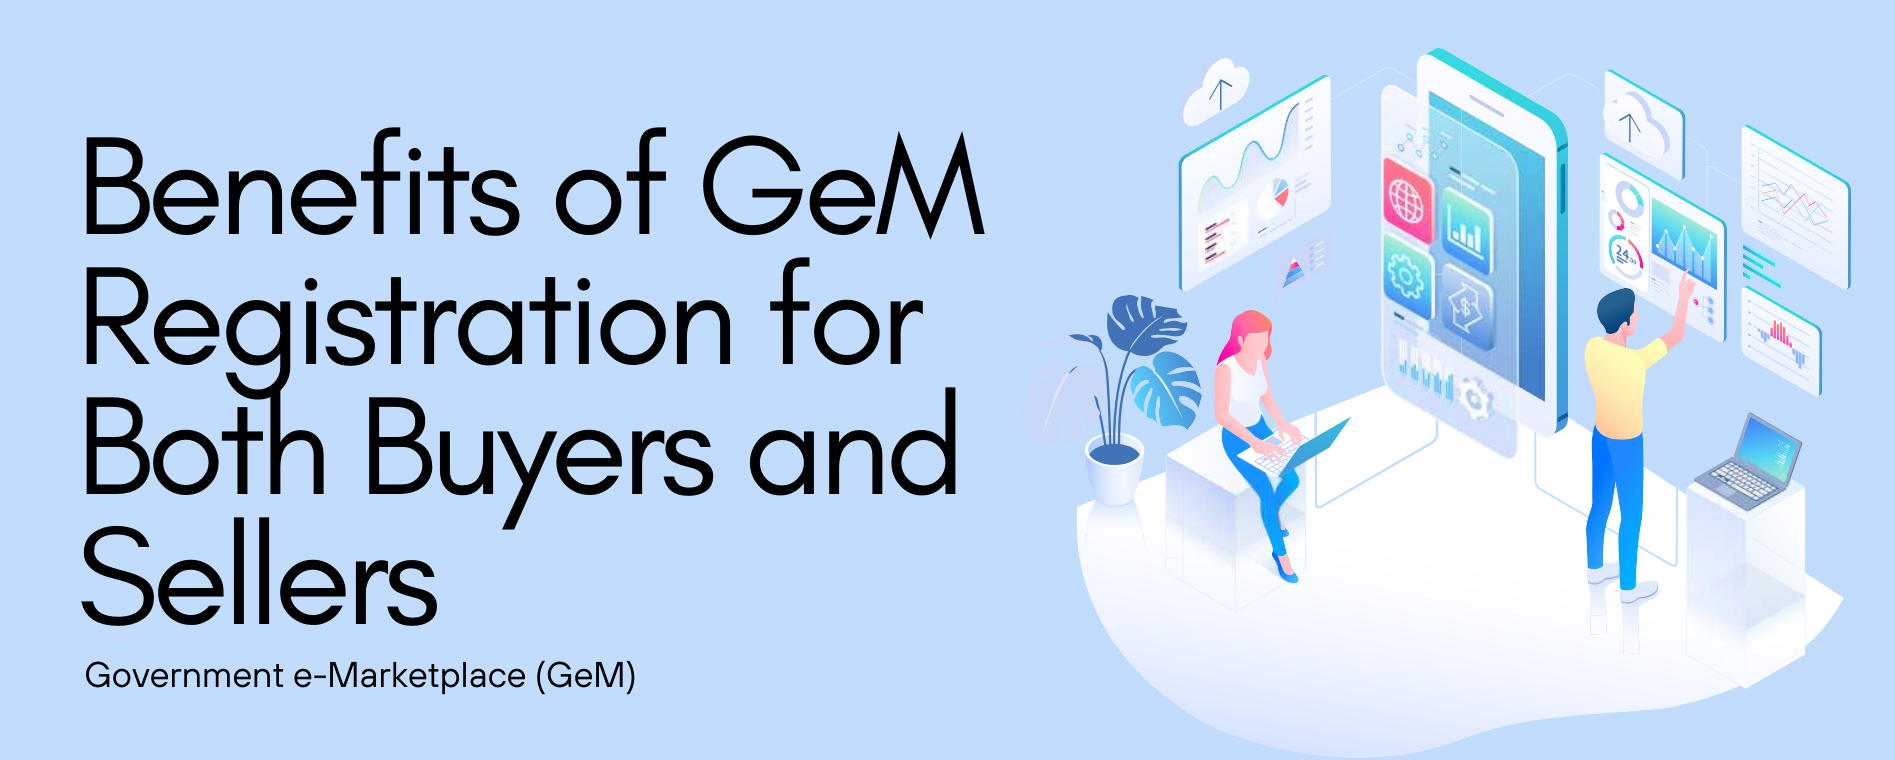 Benefits of GeM Registration for Both Buyers and Sellers